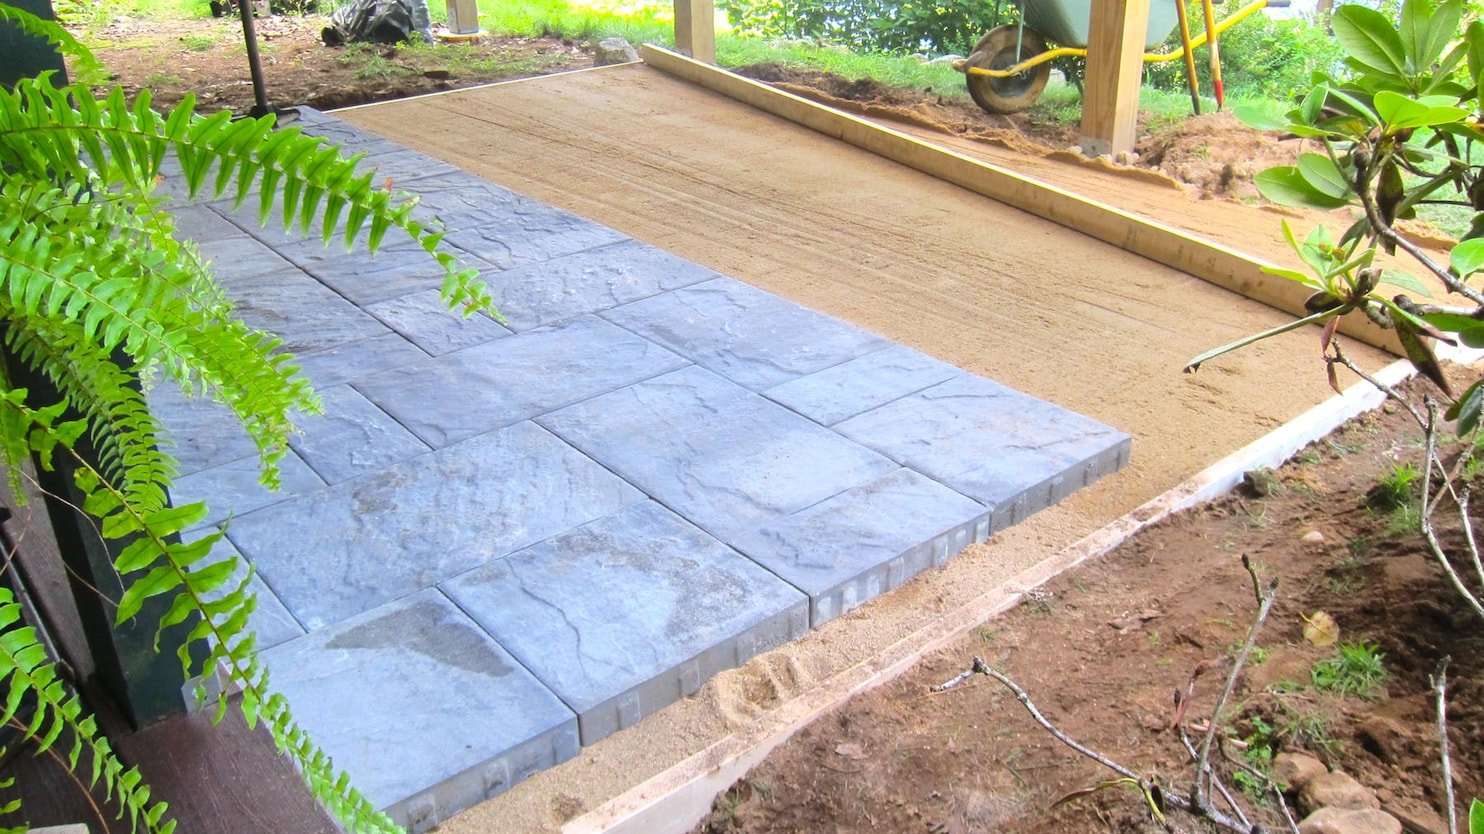 Installing patio pavers is not as tough as you think